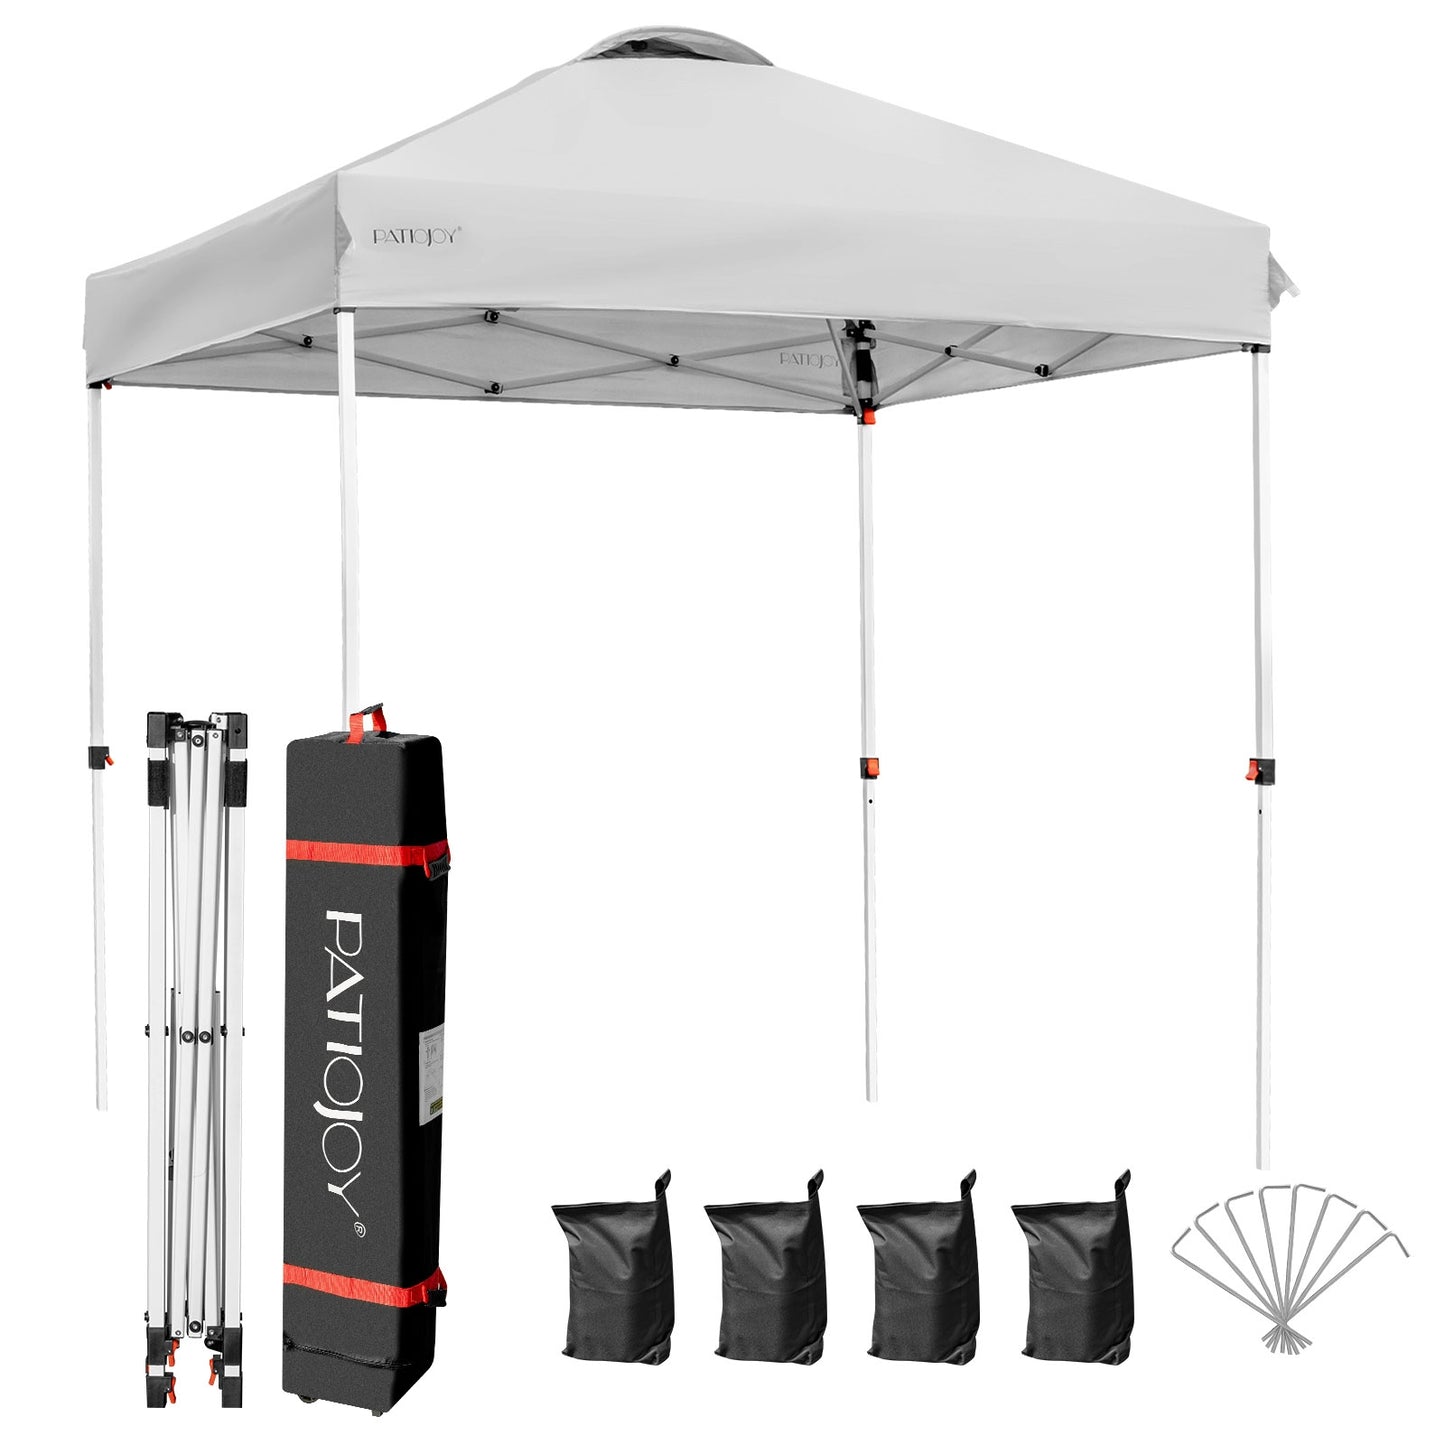 6.6 x 6.6 Feet Outdoor Pop-up Canopy Tent with Roller Bag-Gray